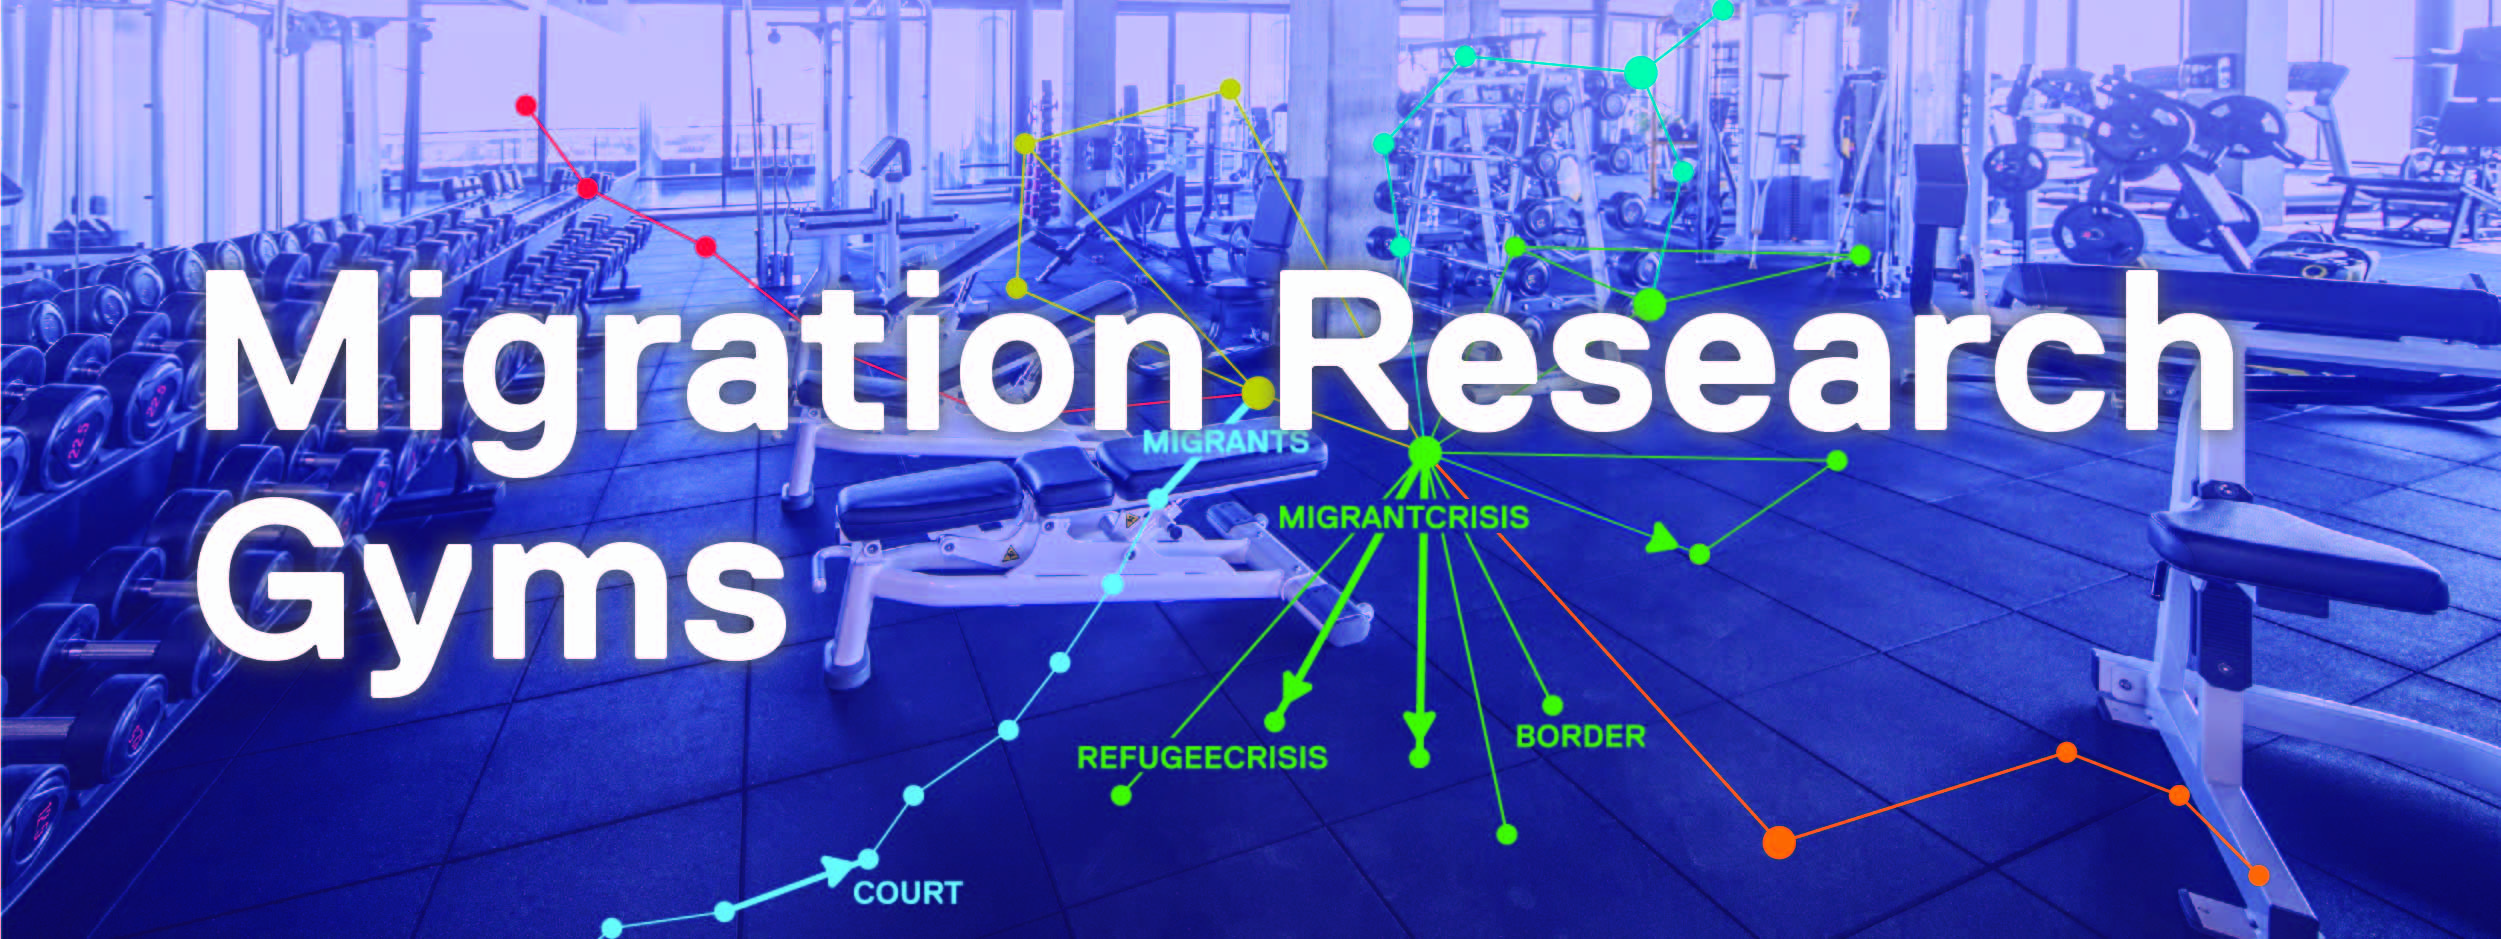 Migration ResearchGyms